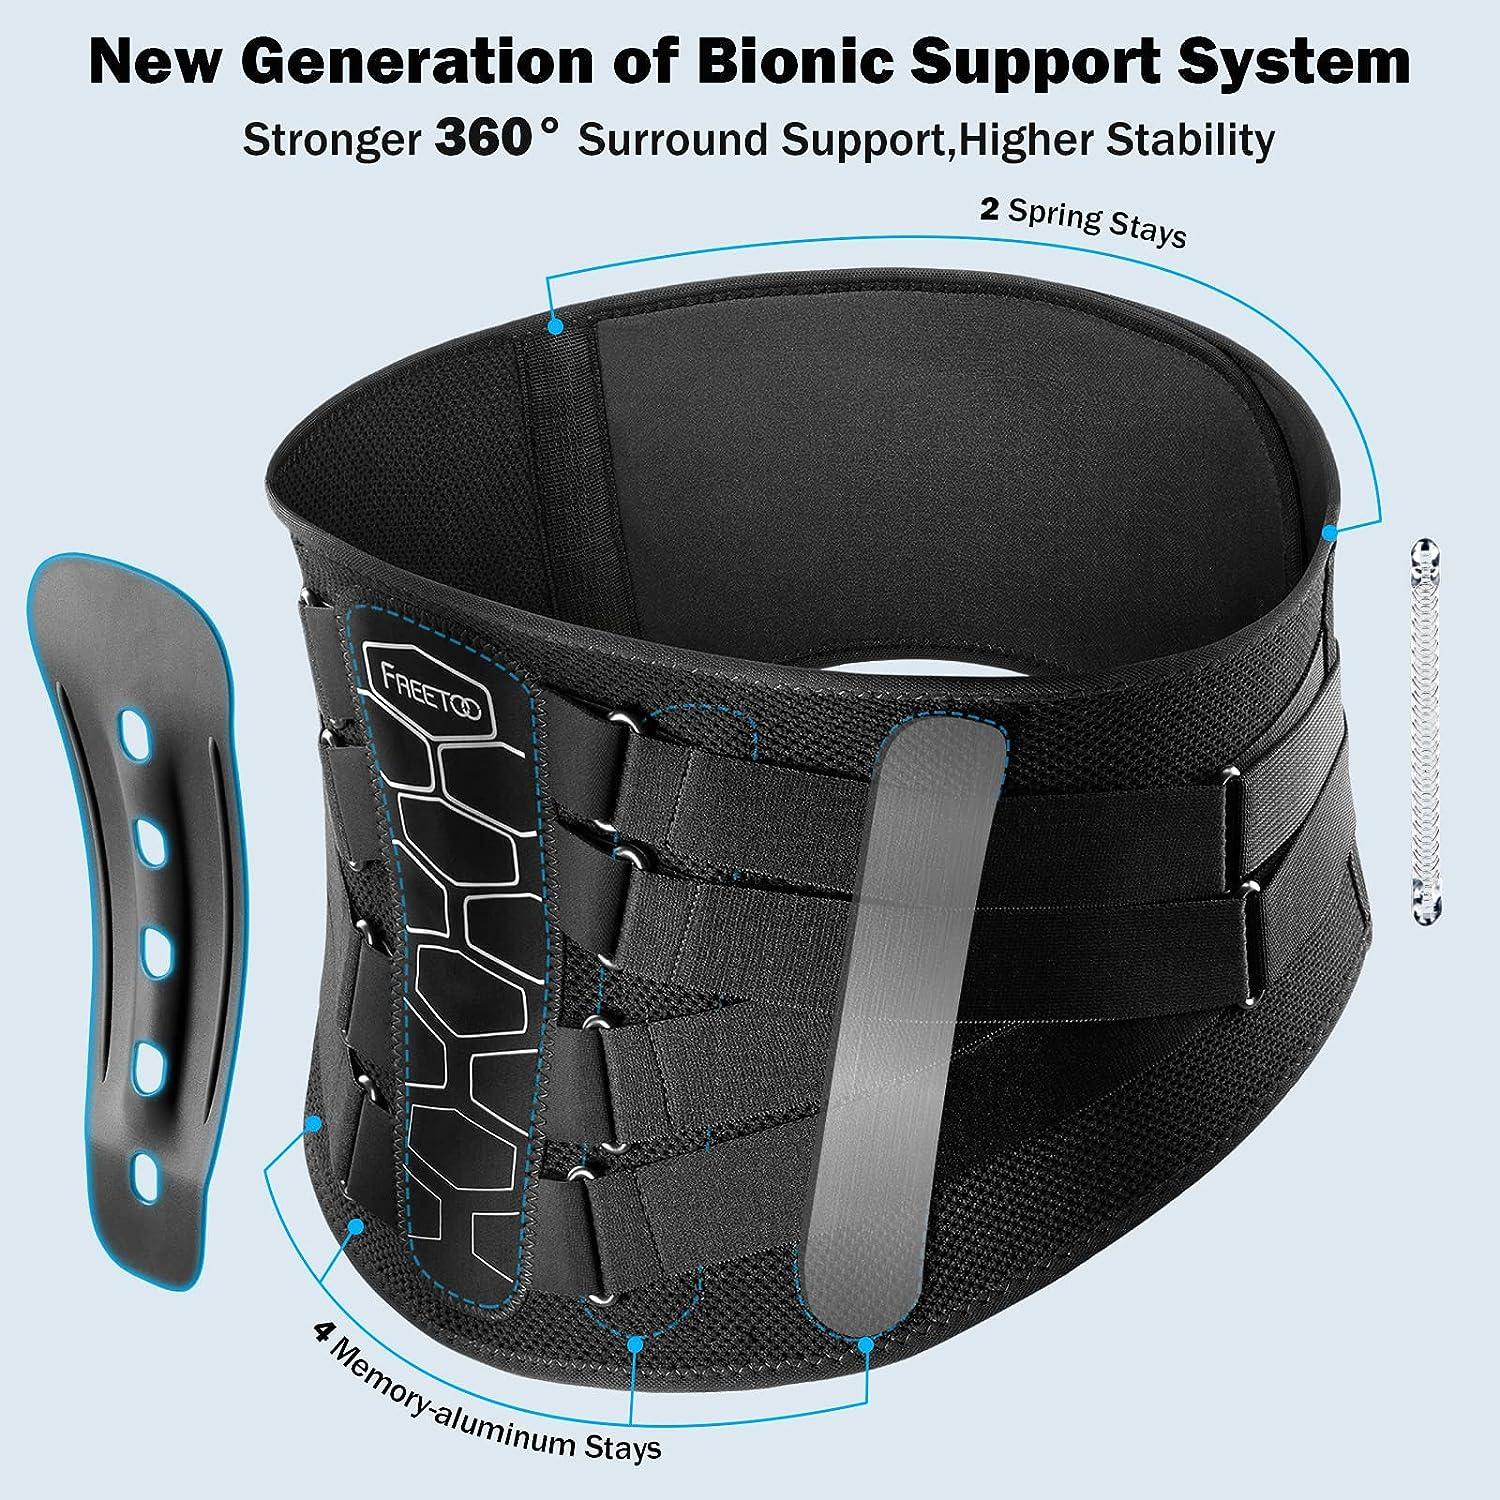  FREETOO Back Brace for Men Lower Back Pain, Breathable Back  Support Belt for Women,Work with Soft Pad, Lightweight Lumbar Support for  Lasting Relief, Sciatica, Herniated Disc, M(Waist: 85-100 CM) : Health